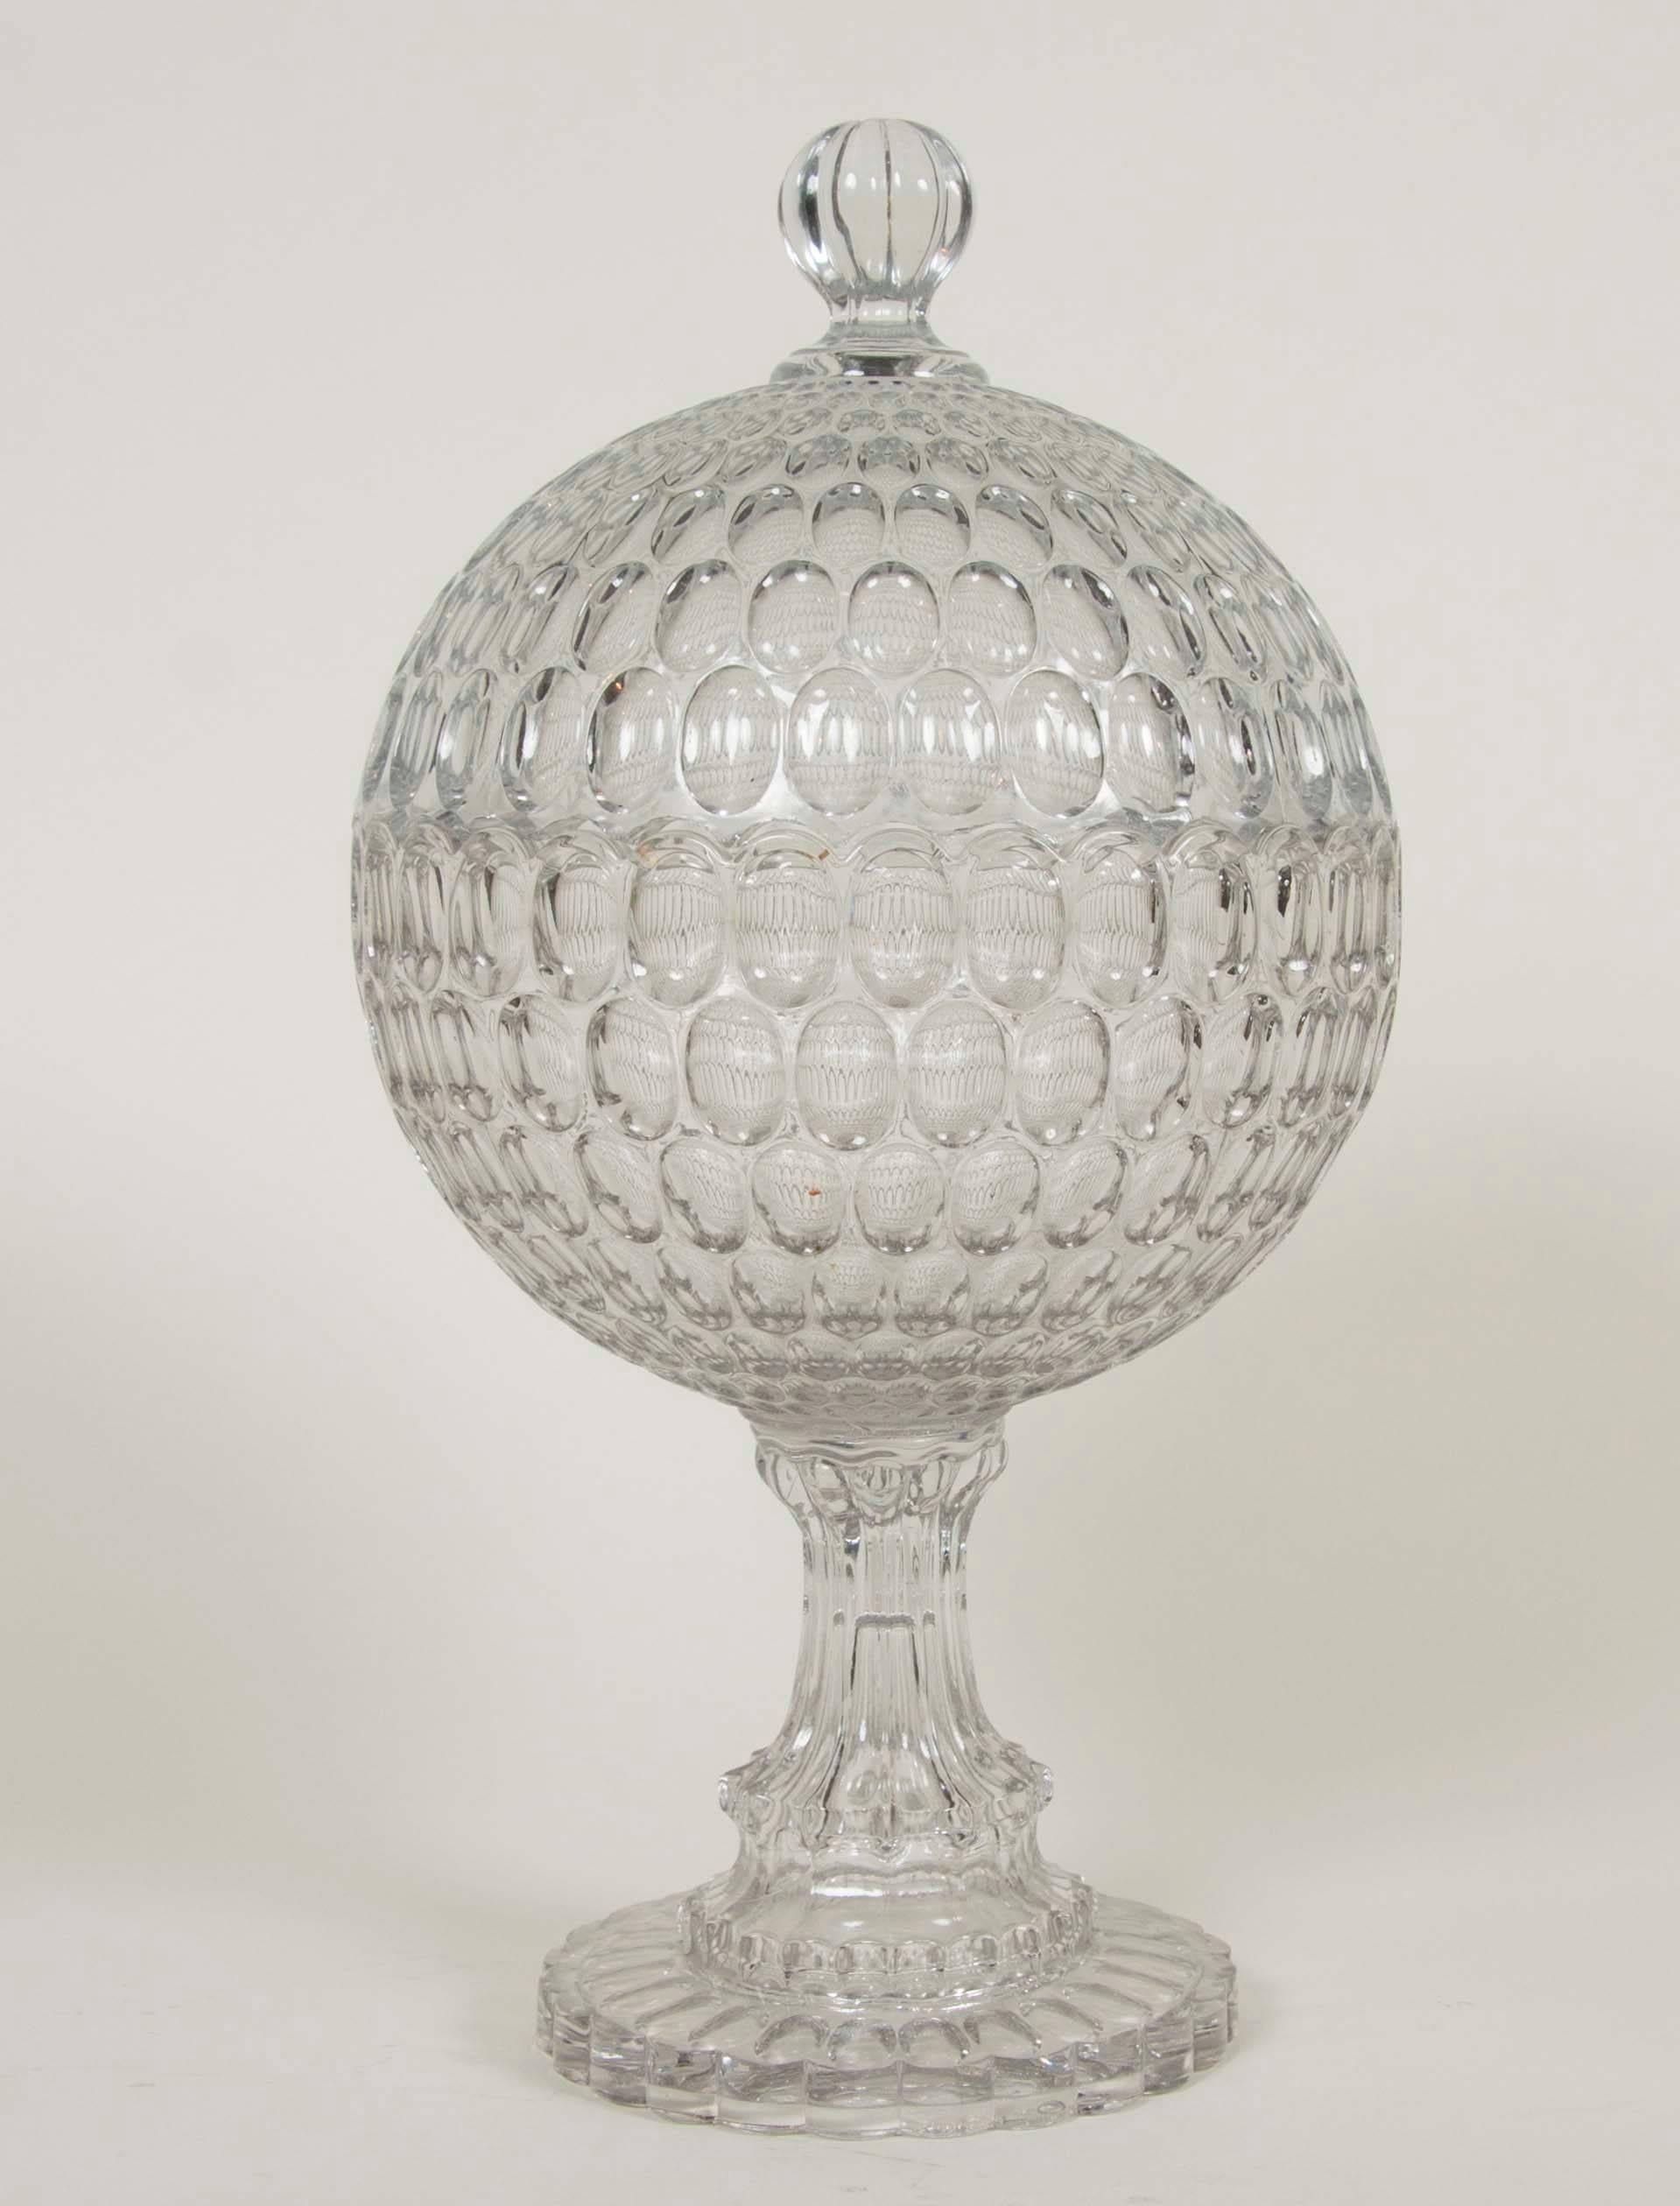 Two early thumbprint/Argus (OMN) covered bowl or compote. Two colorless lead glass bowl featuring a 32 scallop rim above seven rows of thumbprints, raised on a 12 flute double-step hollow standard and a 24 scallop circular foot with a single row of